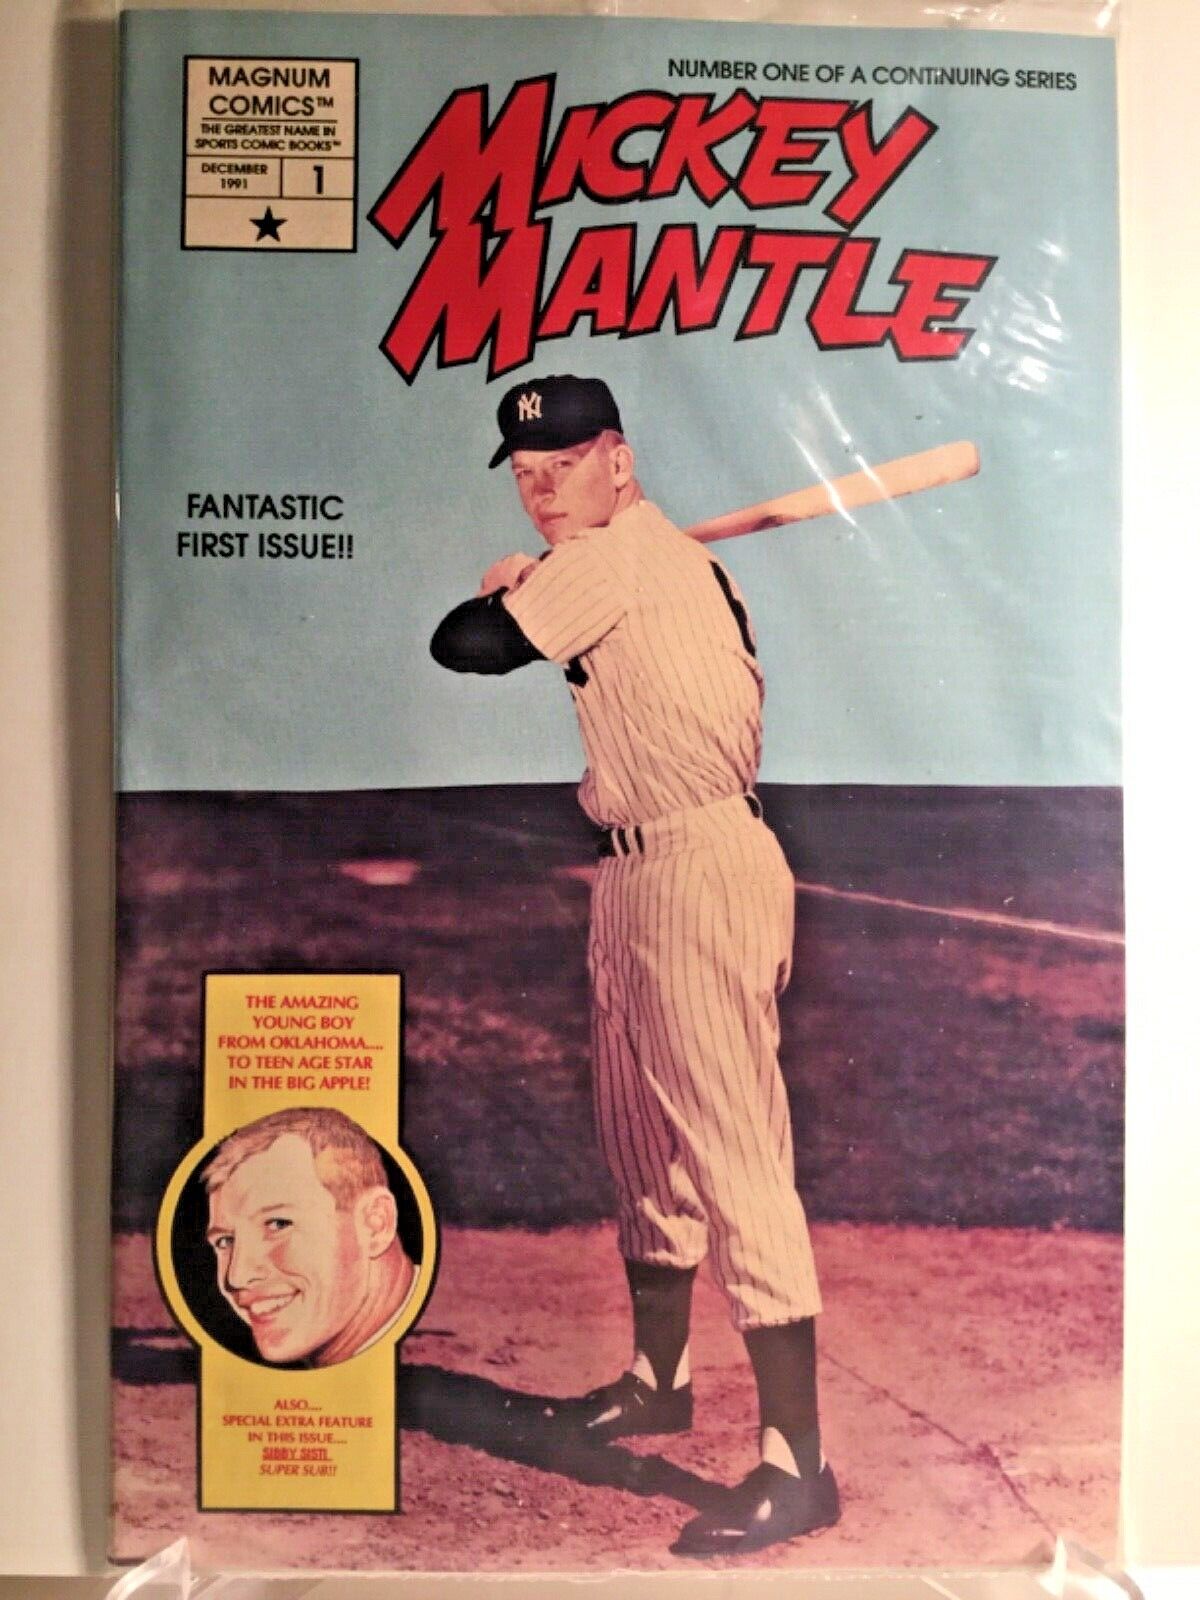 1991 MICKEY MANTLE COMIC 1ST ISSUE WITH BASEBALL POSTCARDS FACTORY WRAPPING 